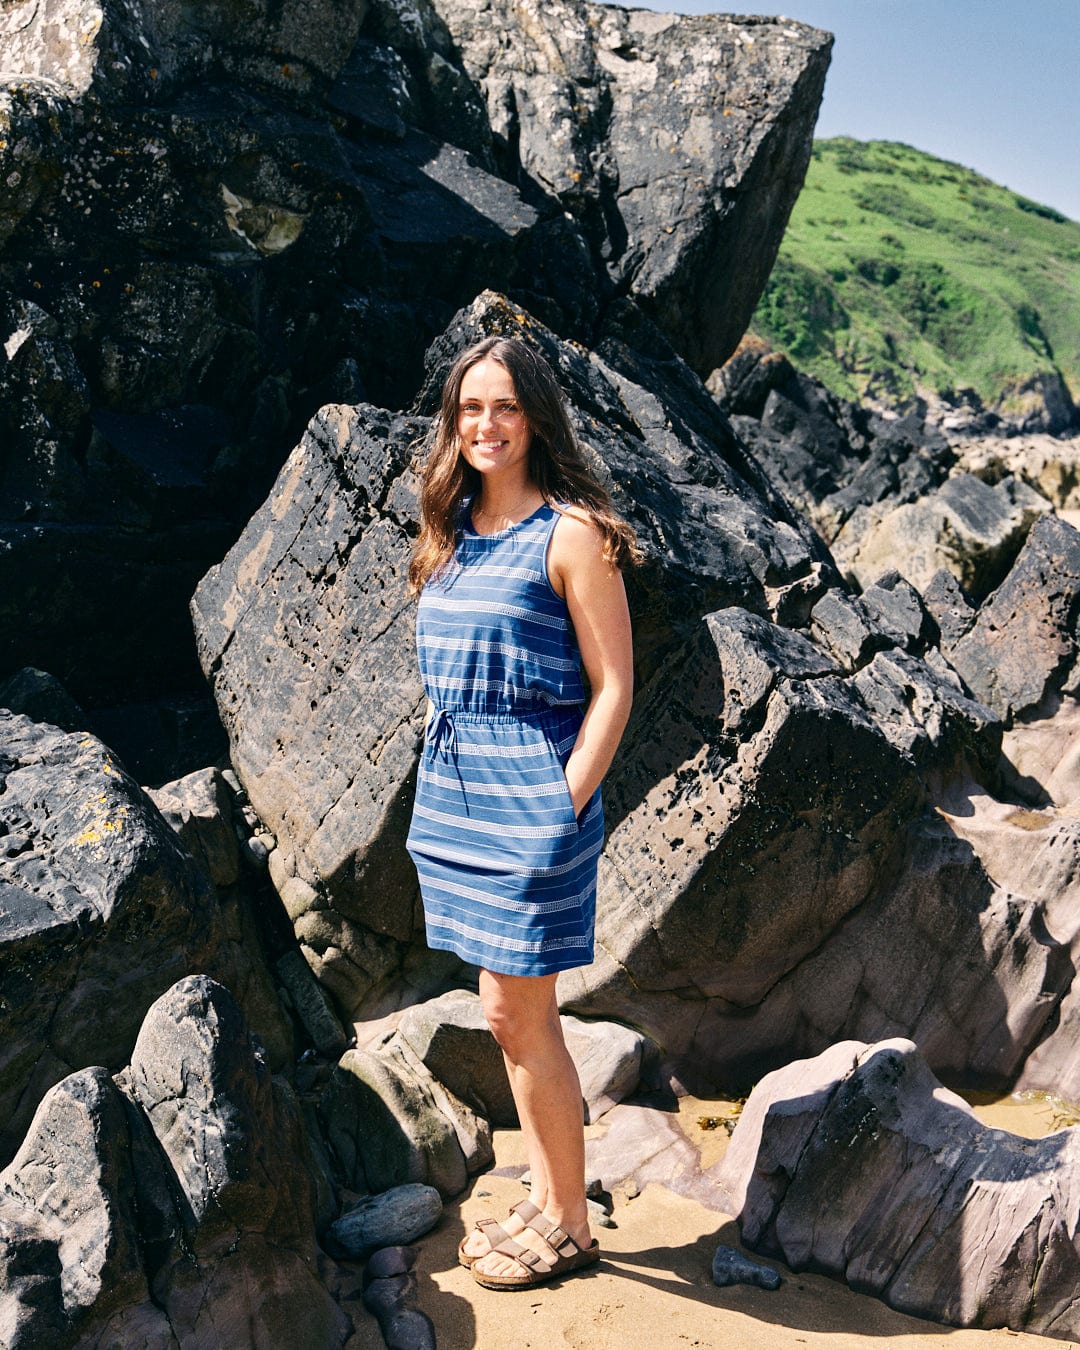 A woman in a Saltrock Marina Bauhaus - Womens Dress - Blue stands smiling in front of large rocks on a sunny day. She is wearing sandals and has her hands in her dress pockets. Green hills are visible in the background.